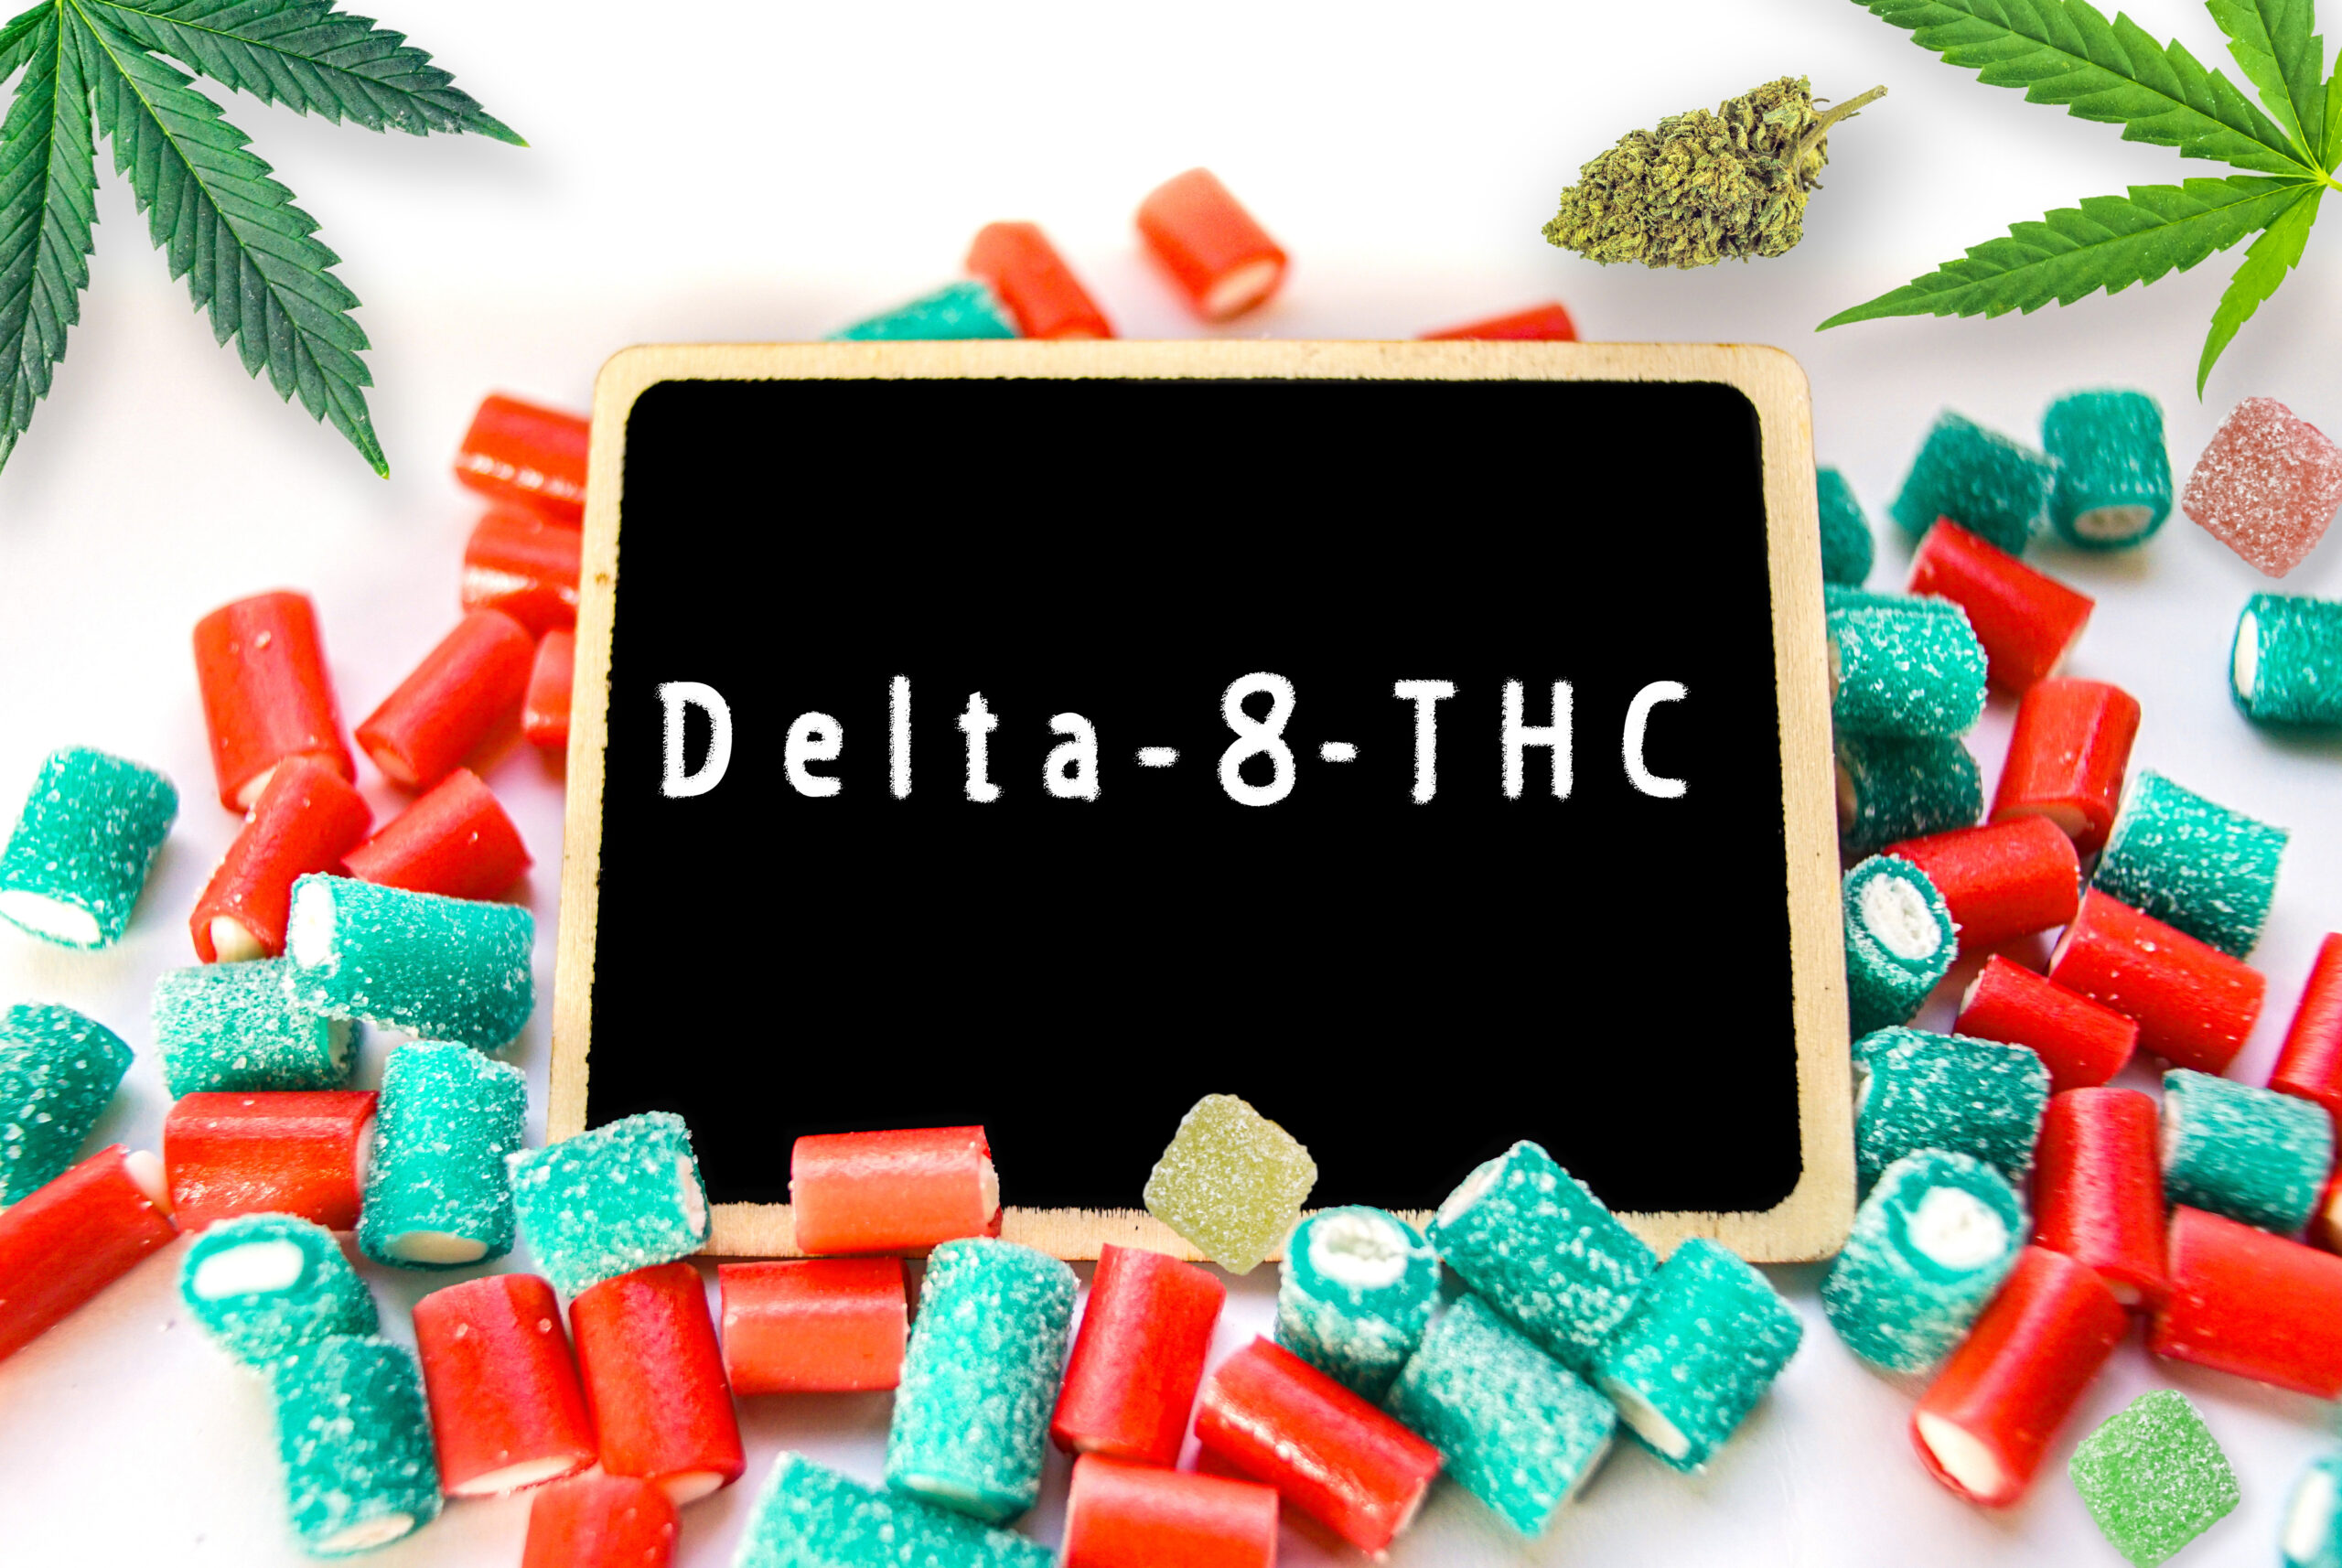 Delta-8 THC: Benefits, Risks, and Safety